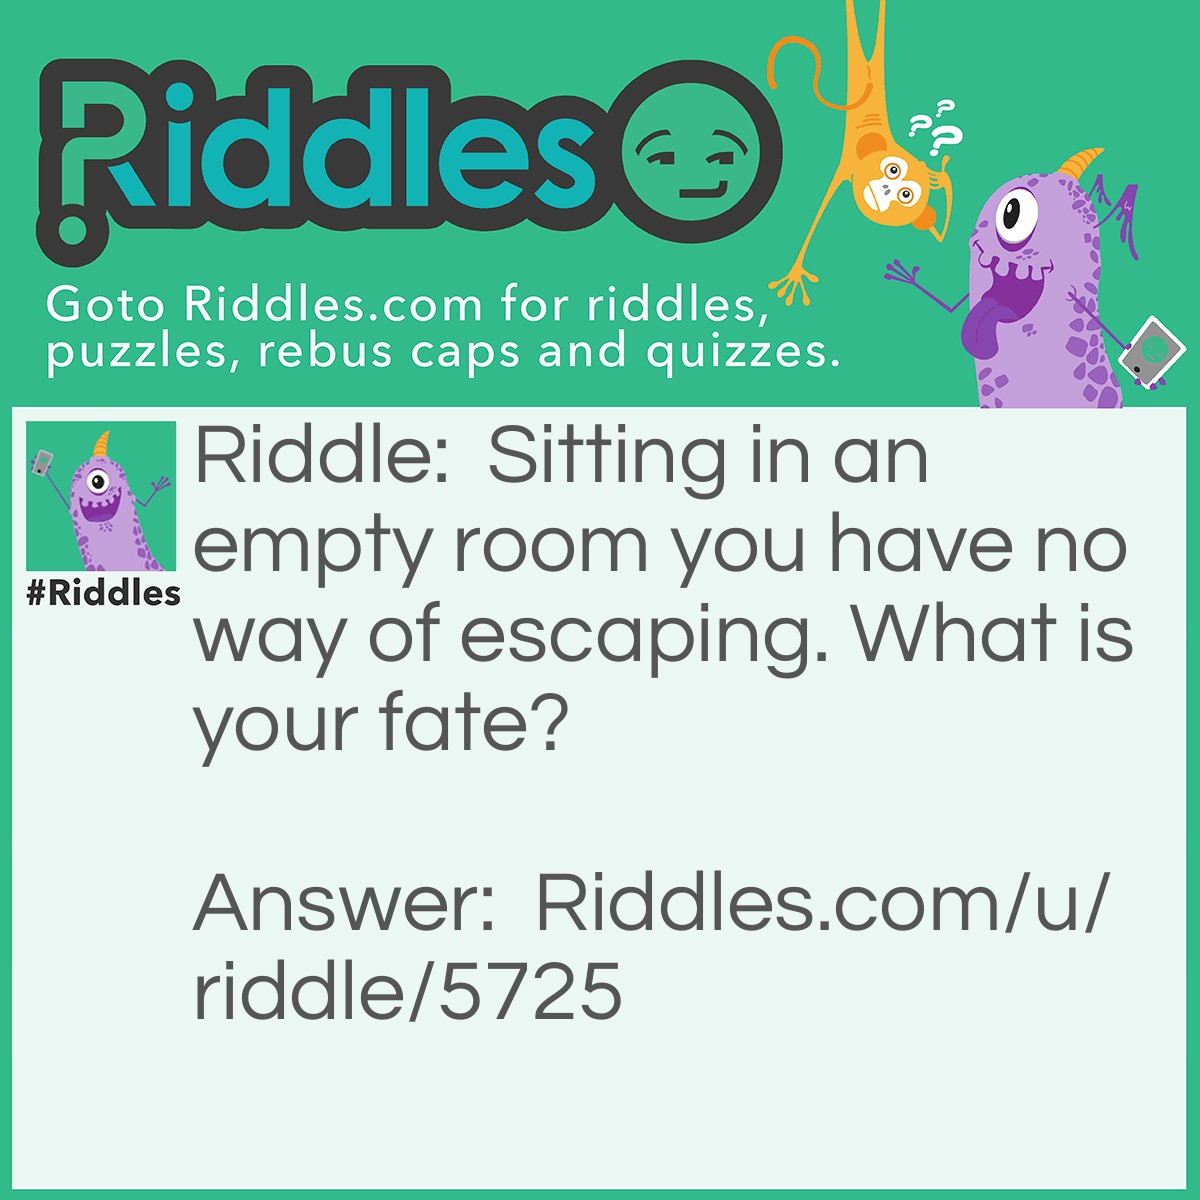 Riddle: Sitting in an empty room you have no way of escaping. What is your fate? Answer: You died from lack of oxygen since the room was empty.